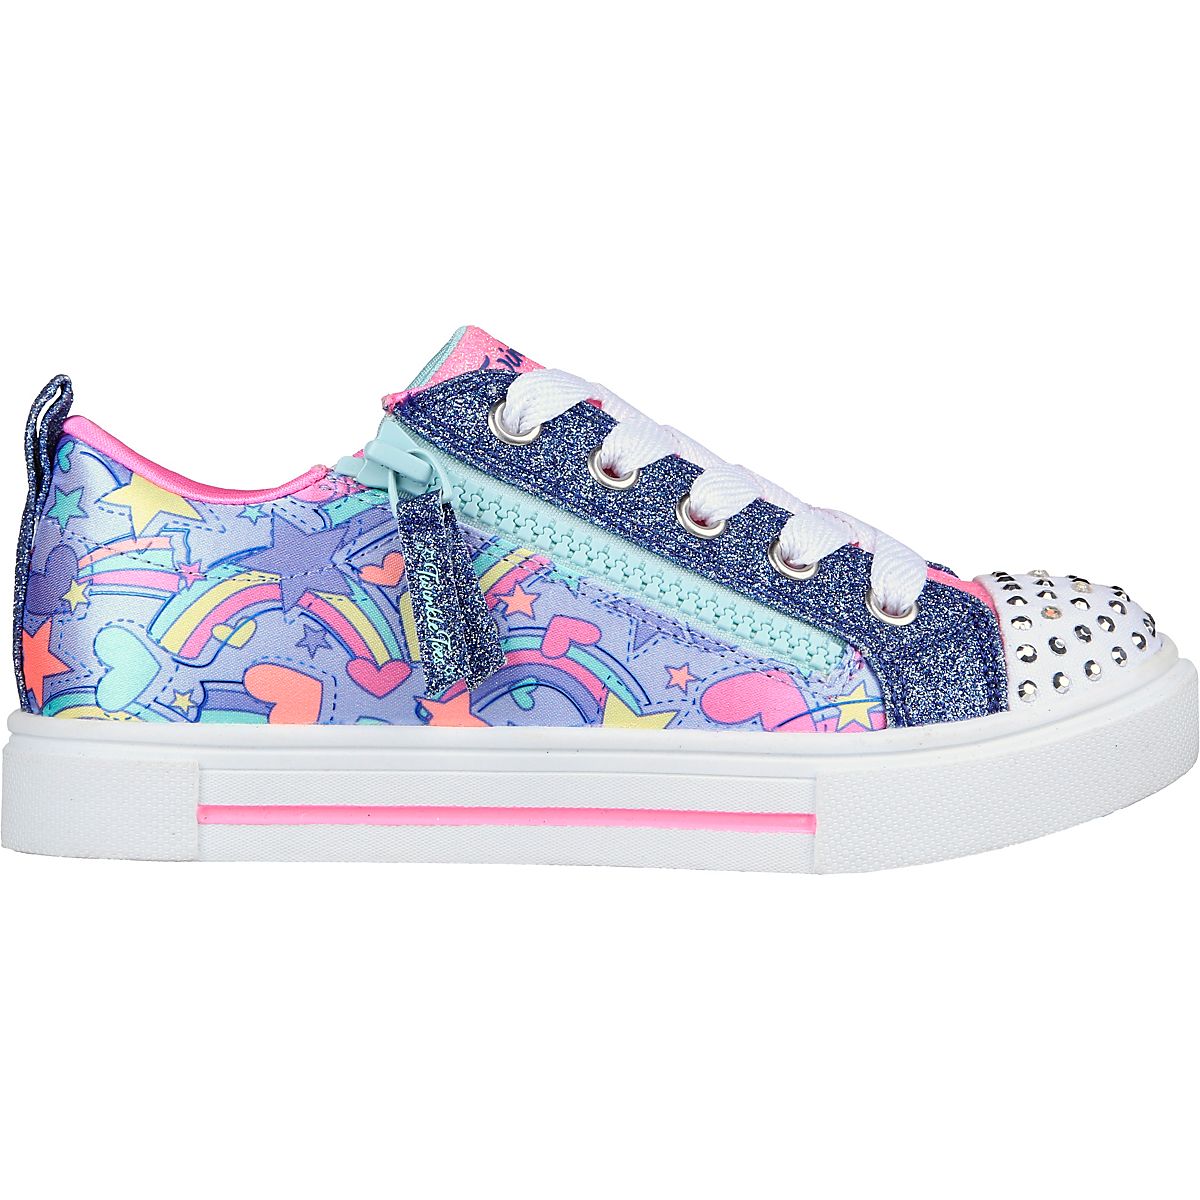 Lovely organic Glow SKECHERS Girls' 4-7 Twinkle Toes Twinkle Sparks Rainbow Shines Shoes |  Academy